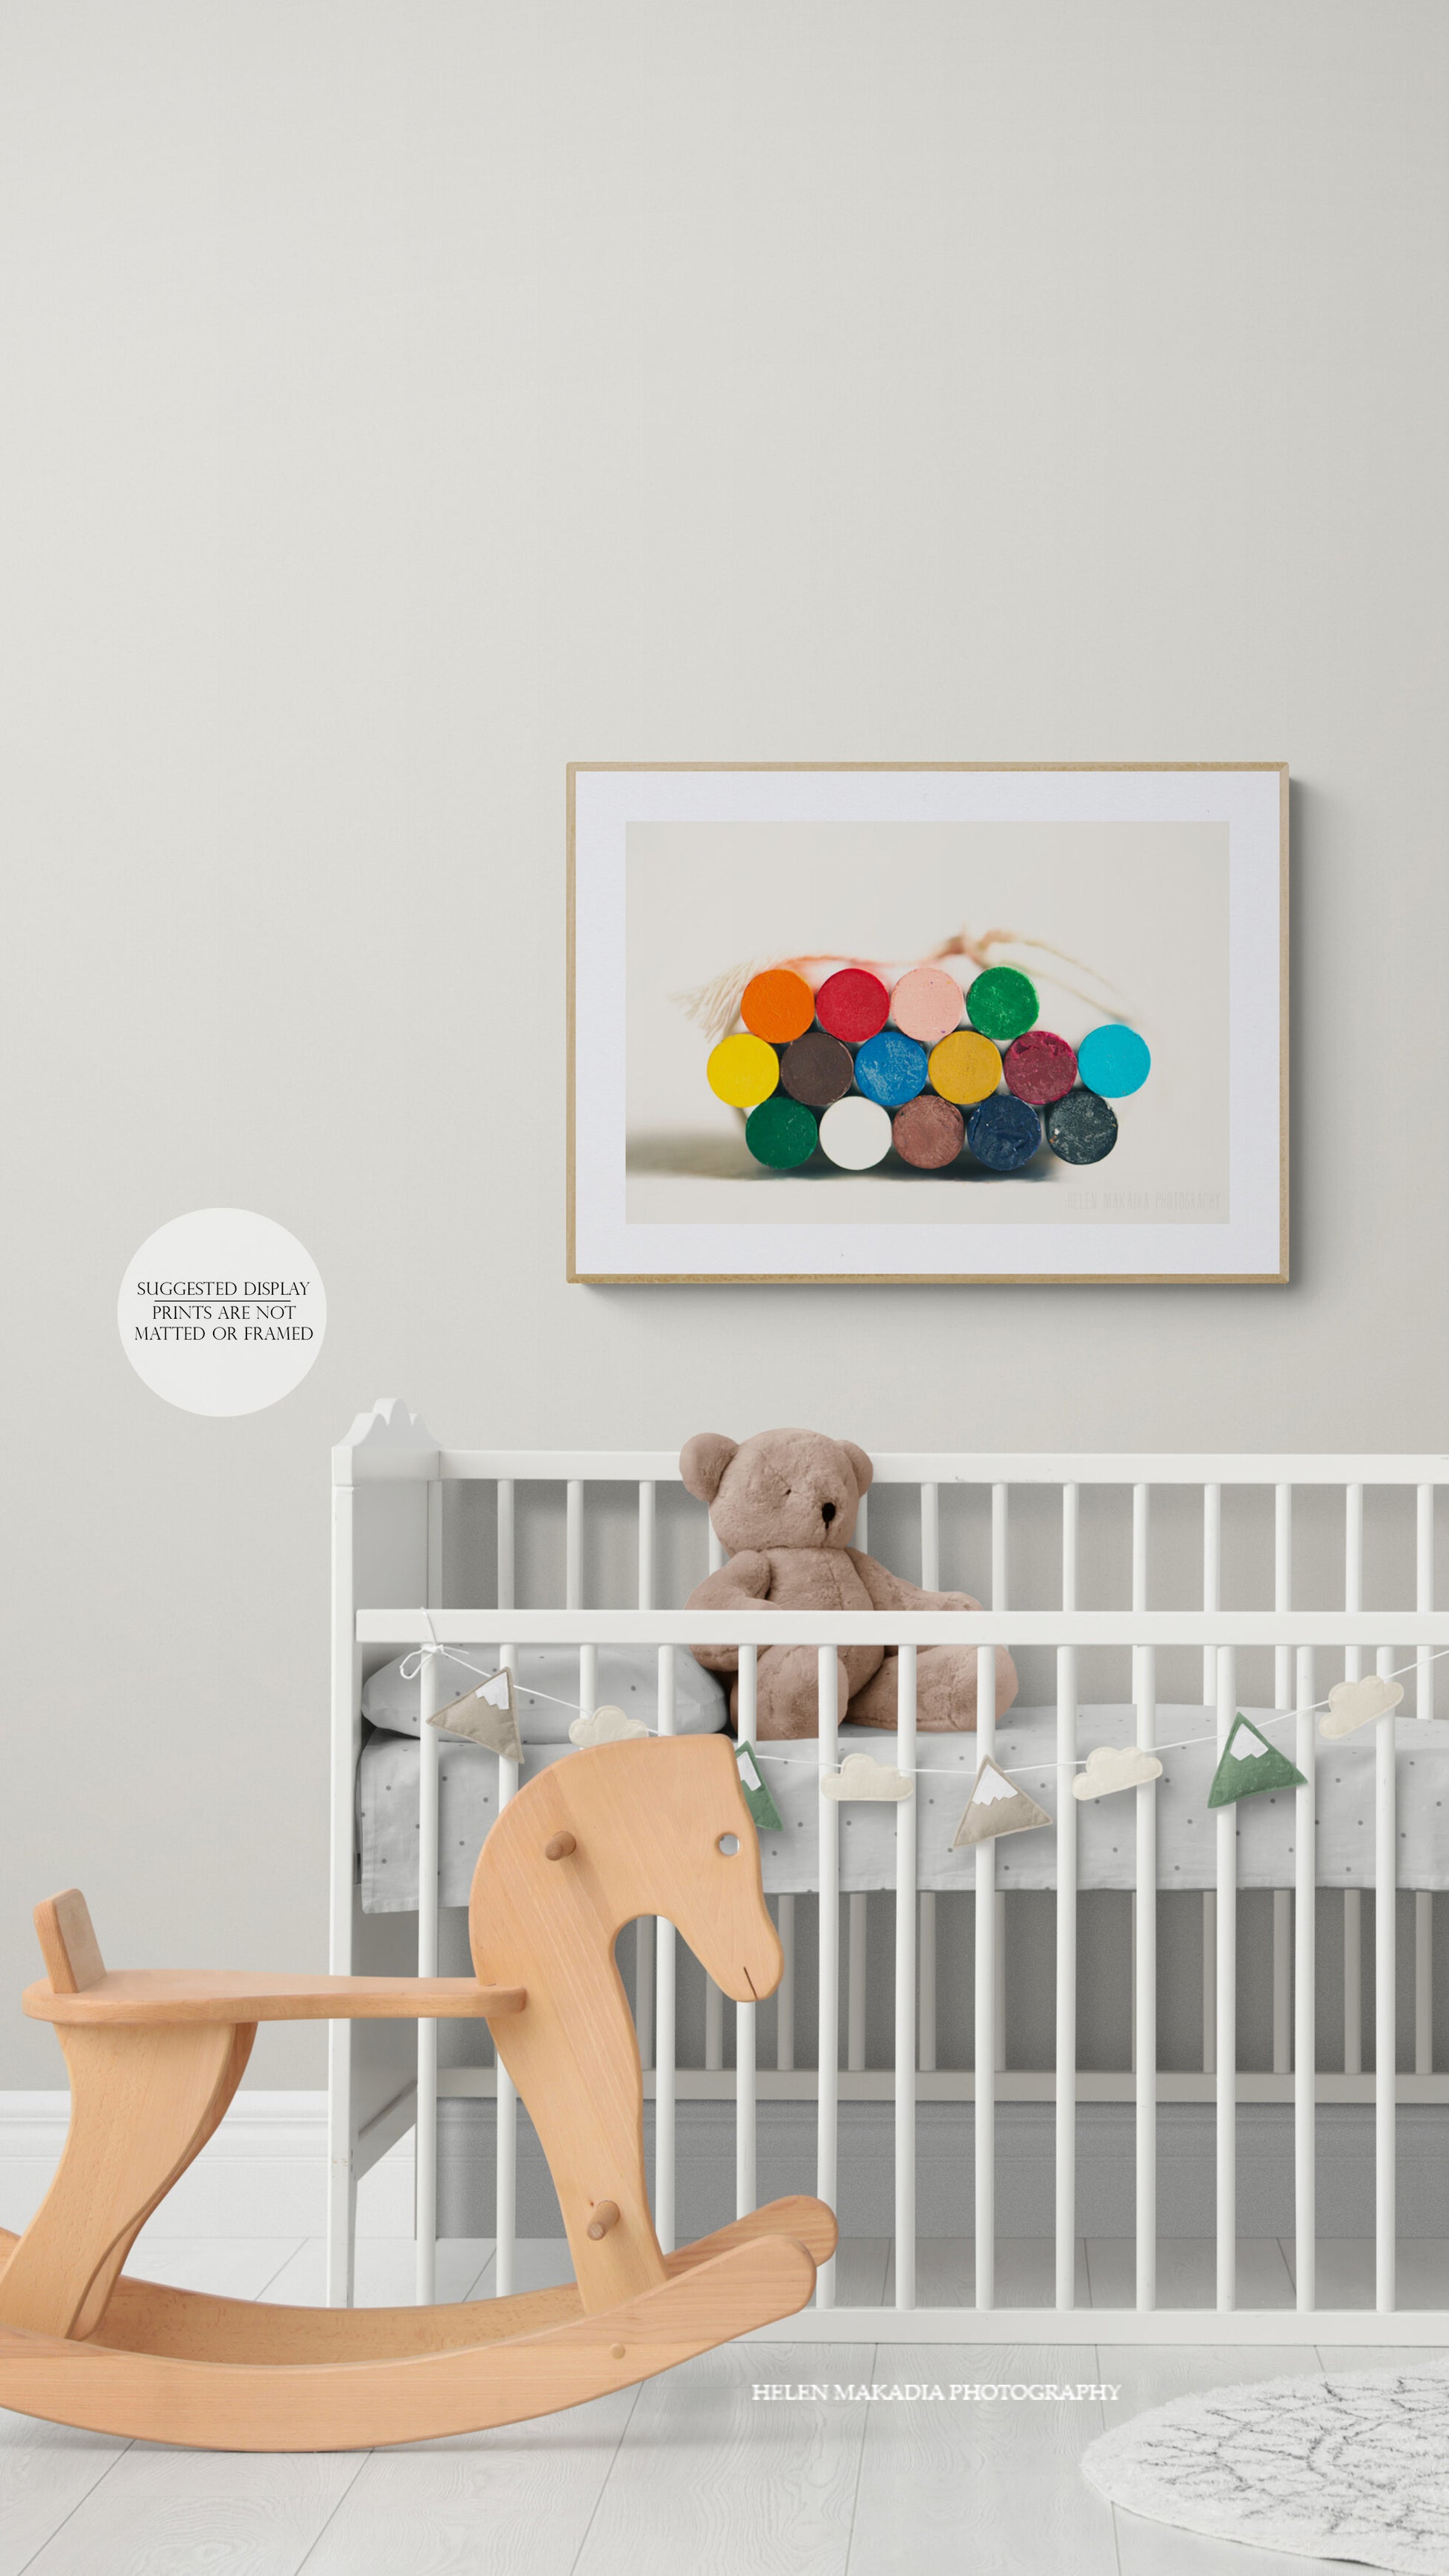 A Photograph of a Bundle of Crayons Ends as wall art in a nursery